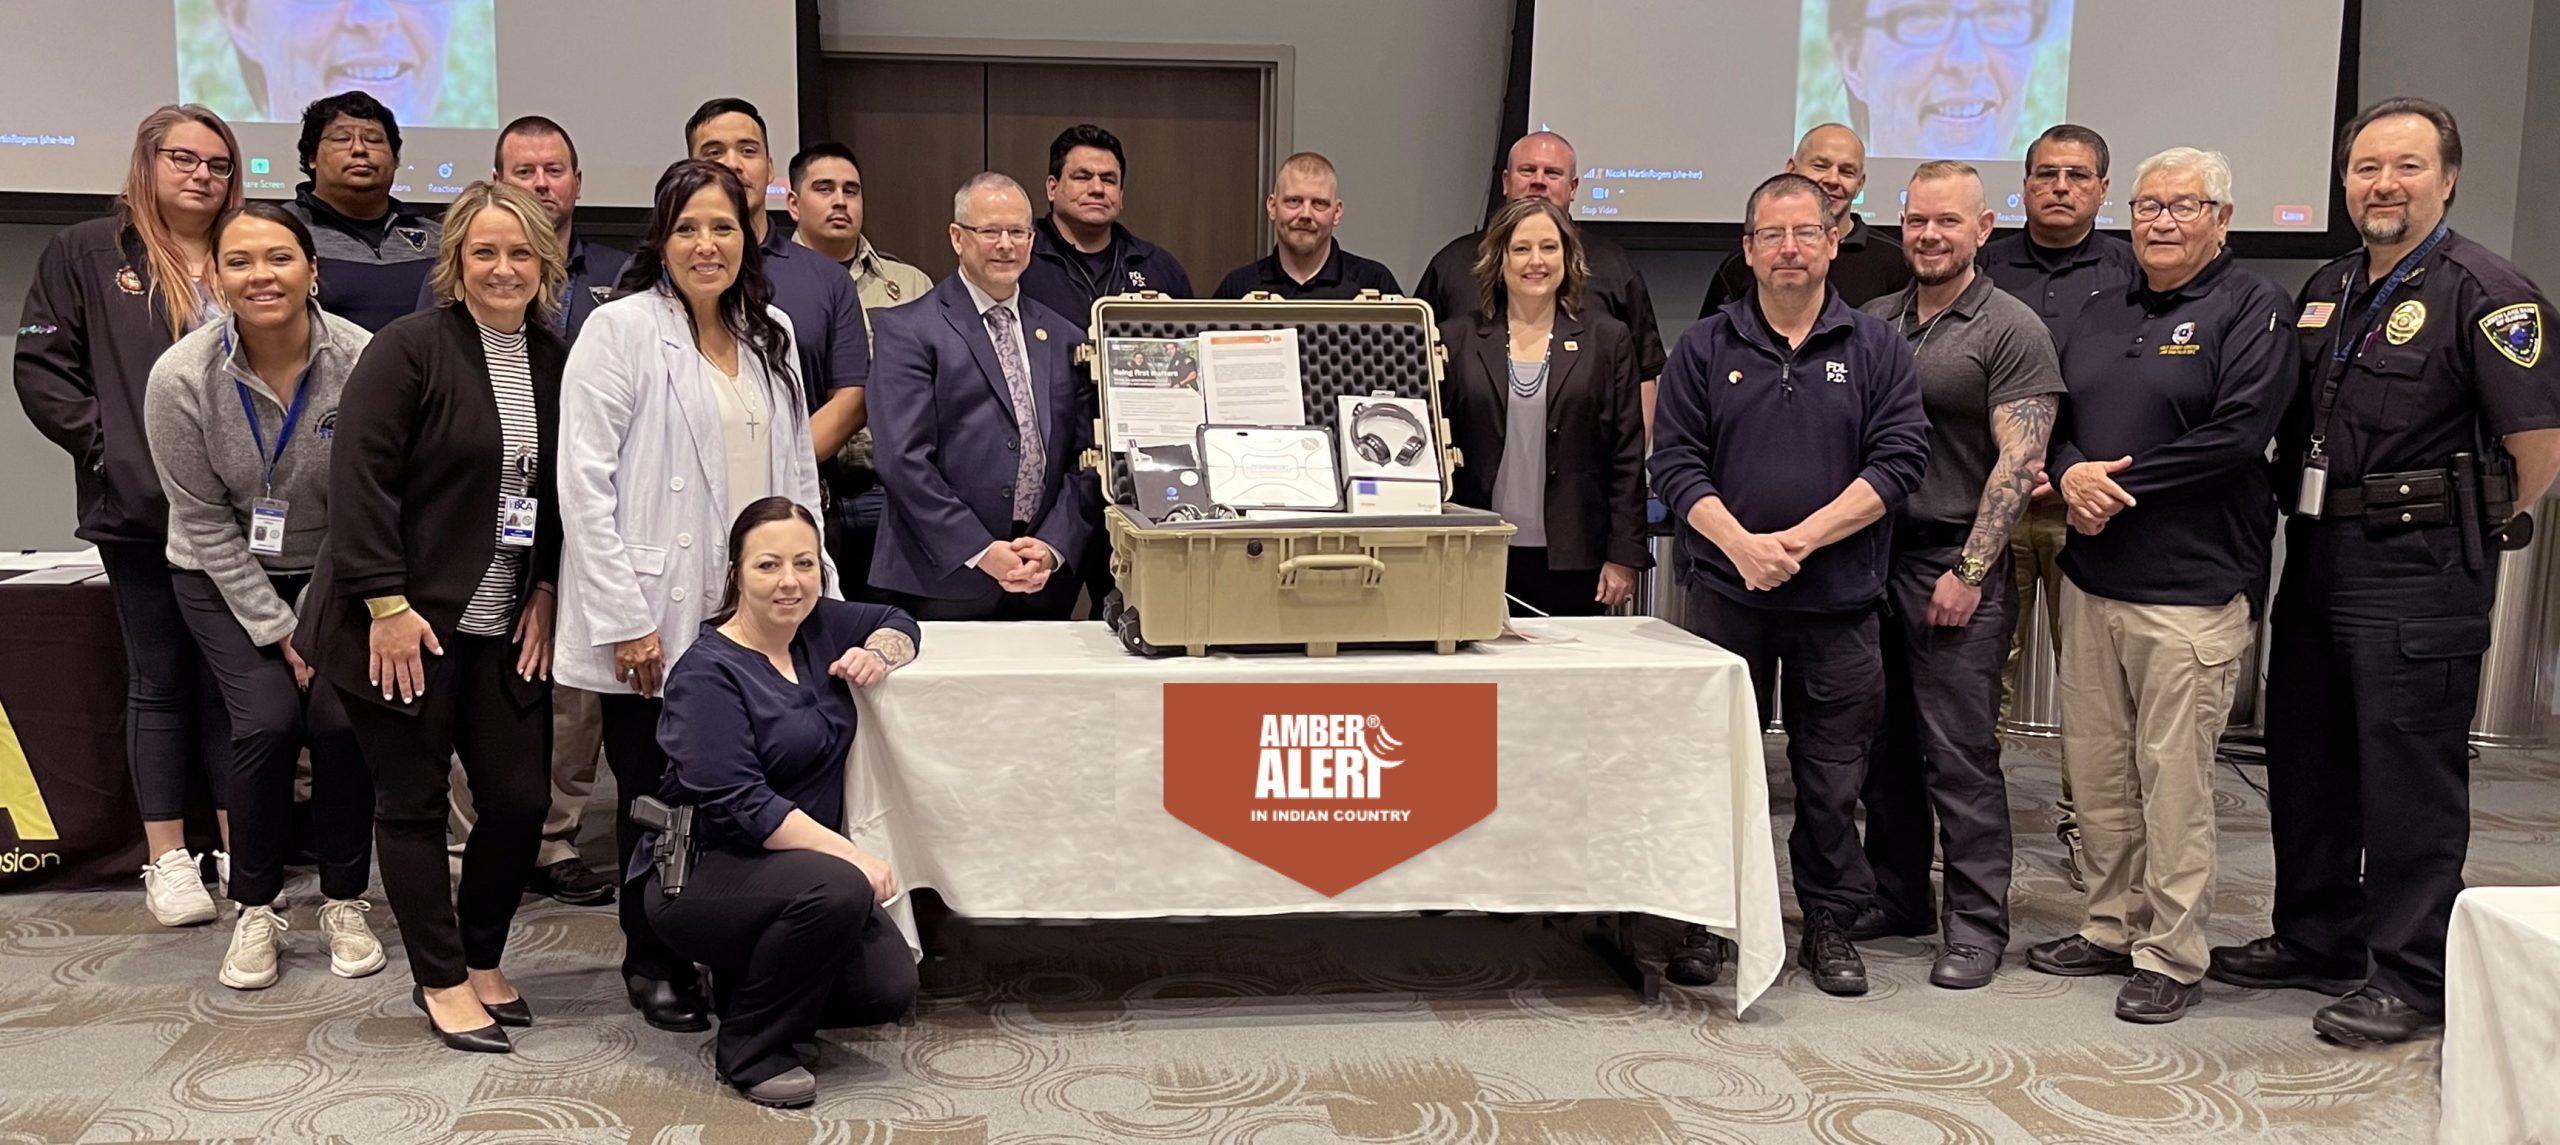 Nearly two dozen law enforcement leaders from six federally recognized Tribes in Minnesota recently met with representatives from the AMBER Alert Training and Technical Assistance Program and AMBER Alert in Indian Country initiative as well as the state’s Bureau of Criminal Apprehension and Department of Public Safety.